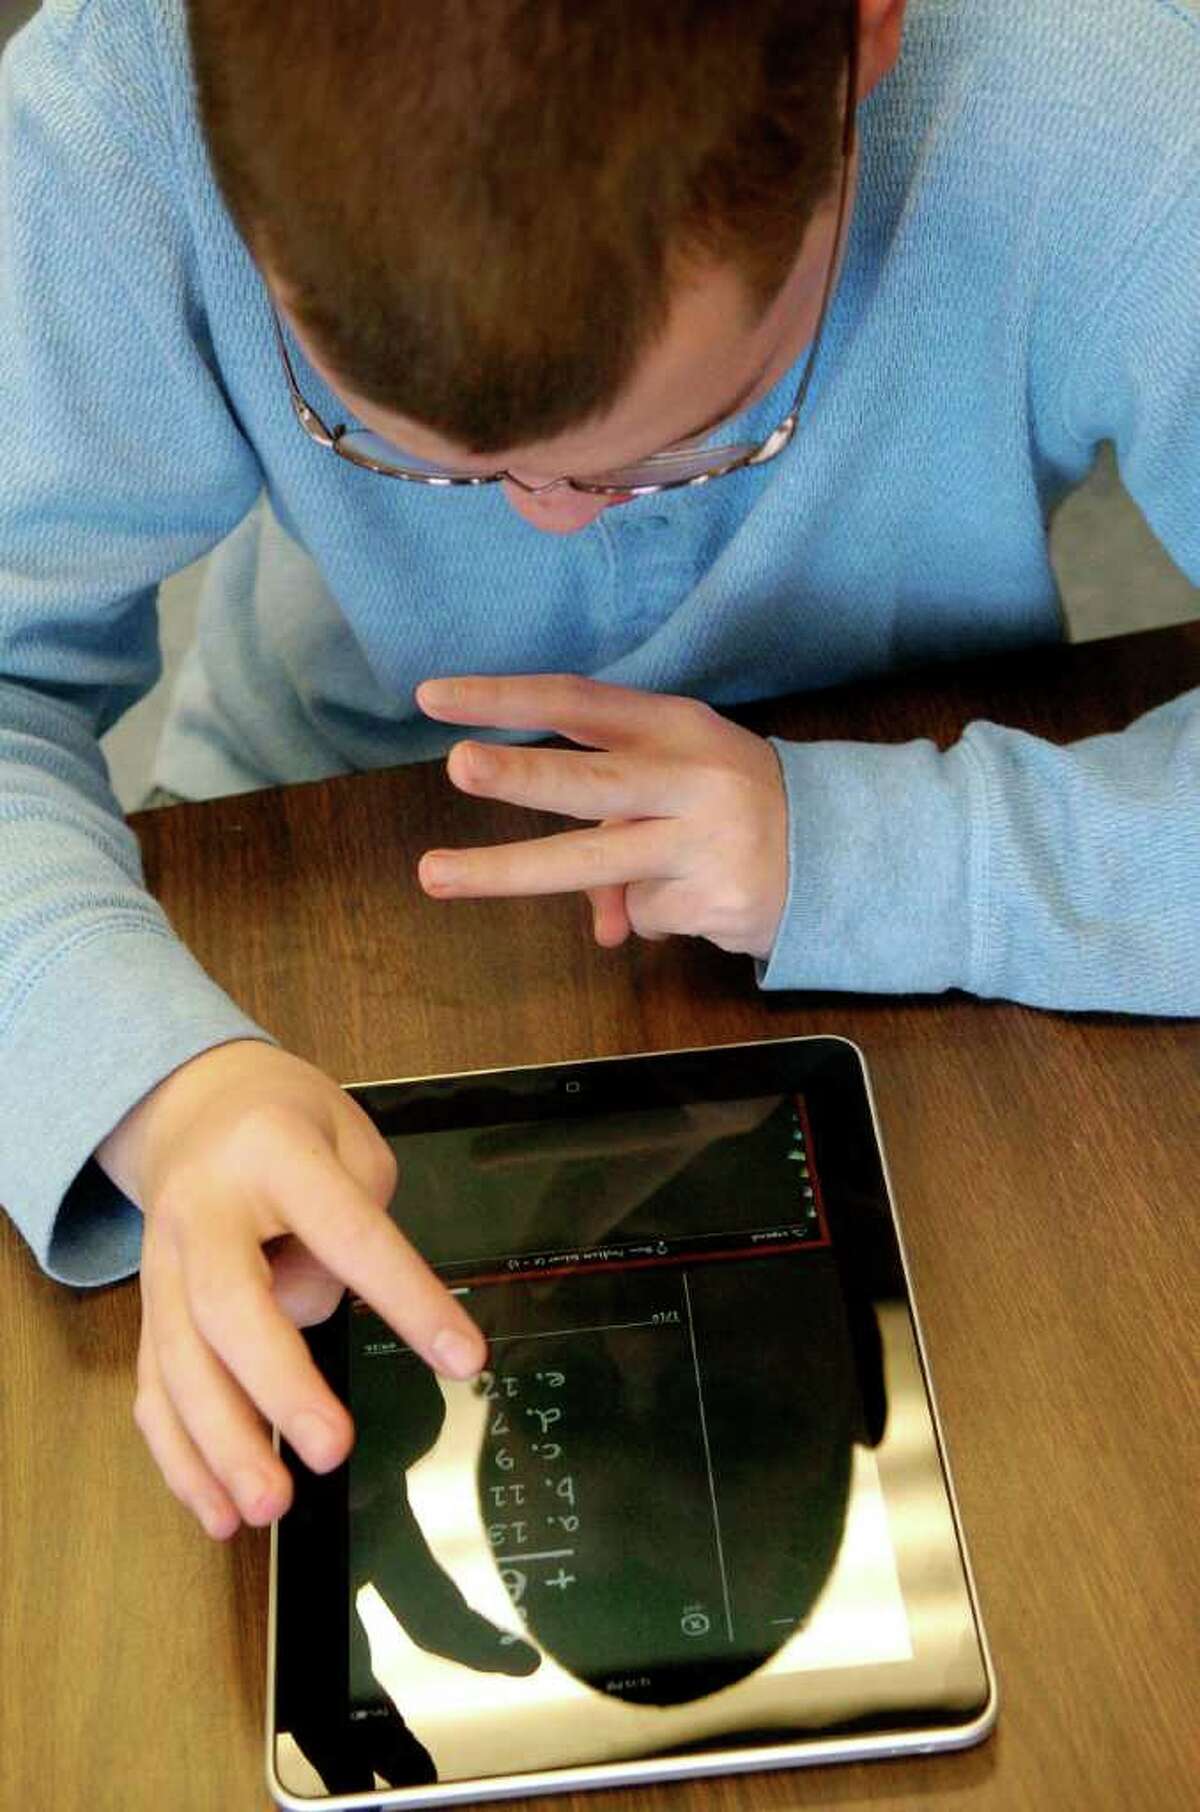 Mickey Teubert, a students in Stamford (Conn.) High School's autism spectrum disorder classroom, uses a iPad after completing his math lesson on Thursday February 3, 2011.